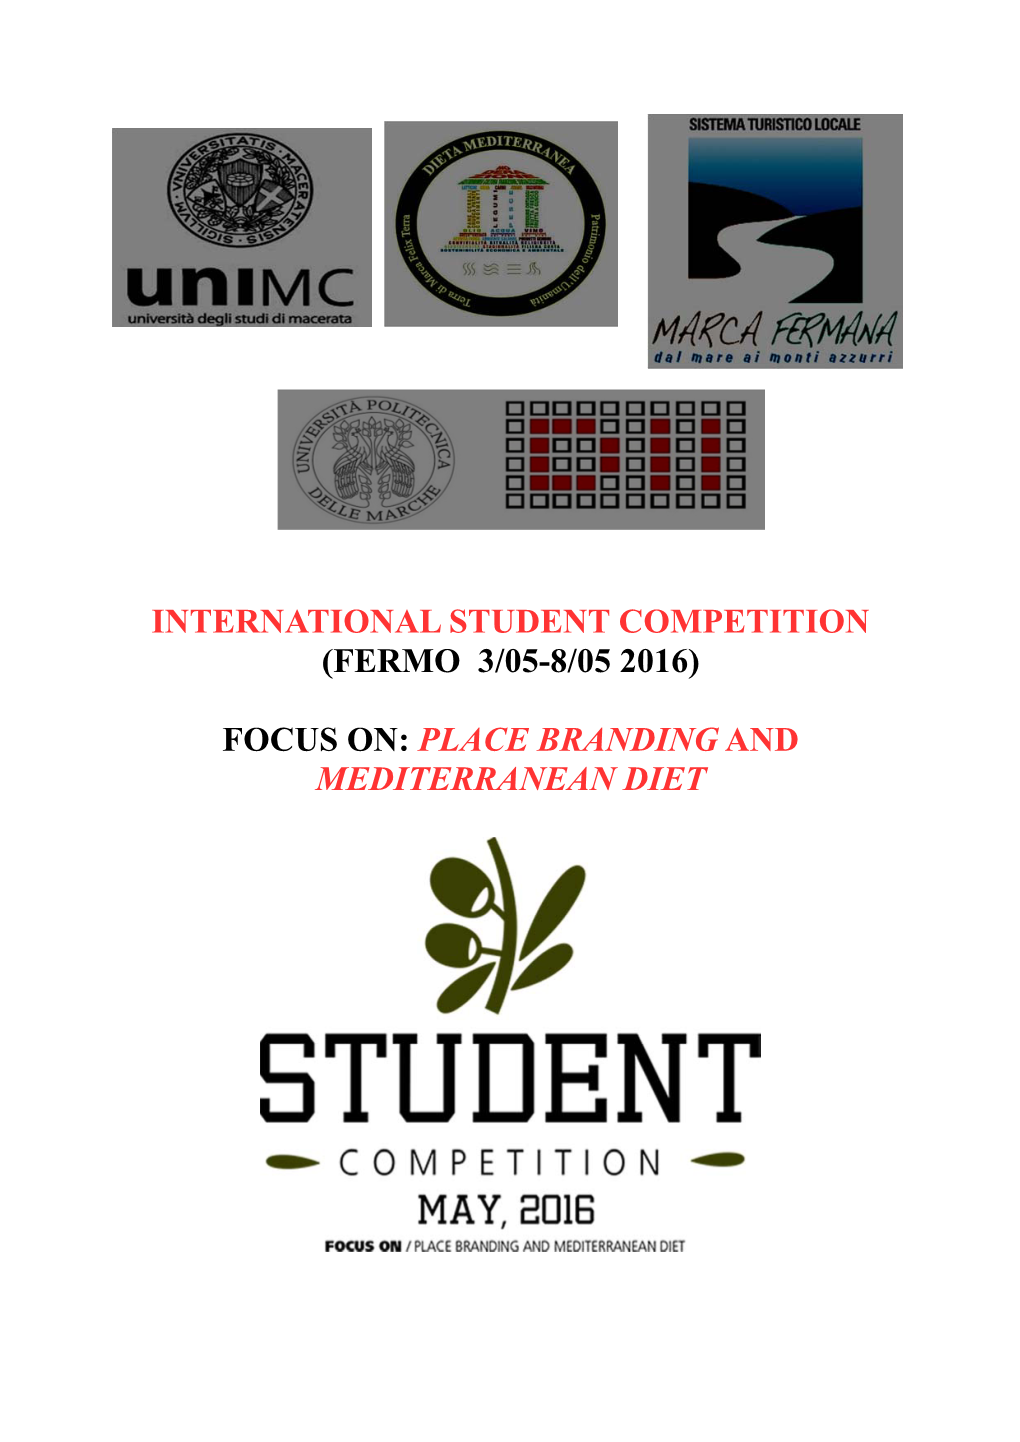 International Student Competition (Fermo 3/05-8/05 2016)